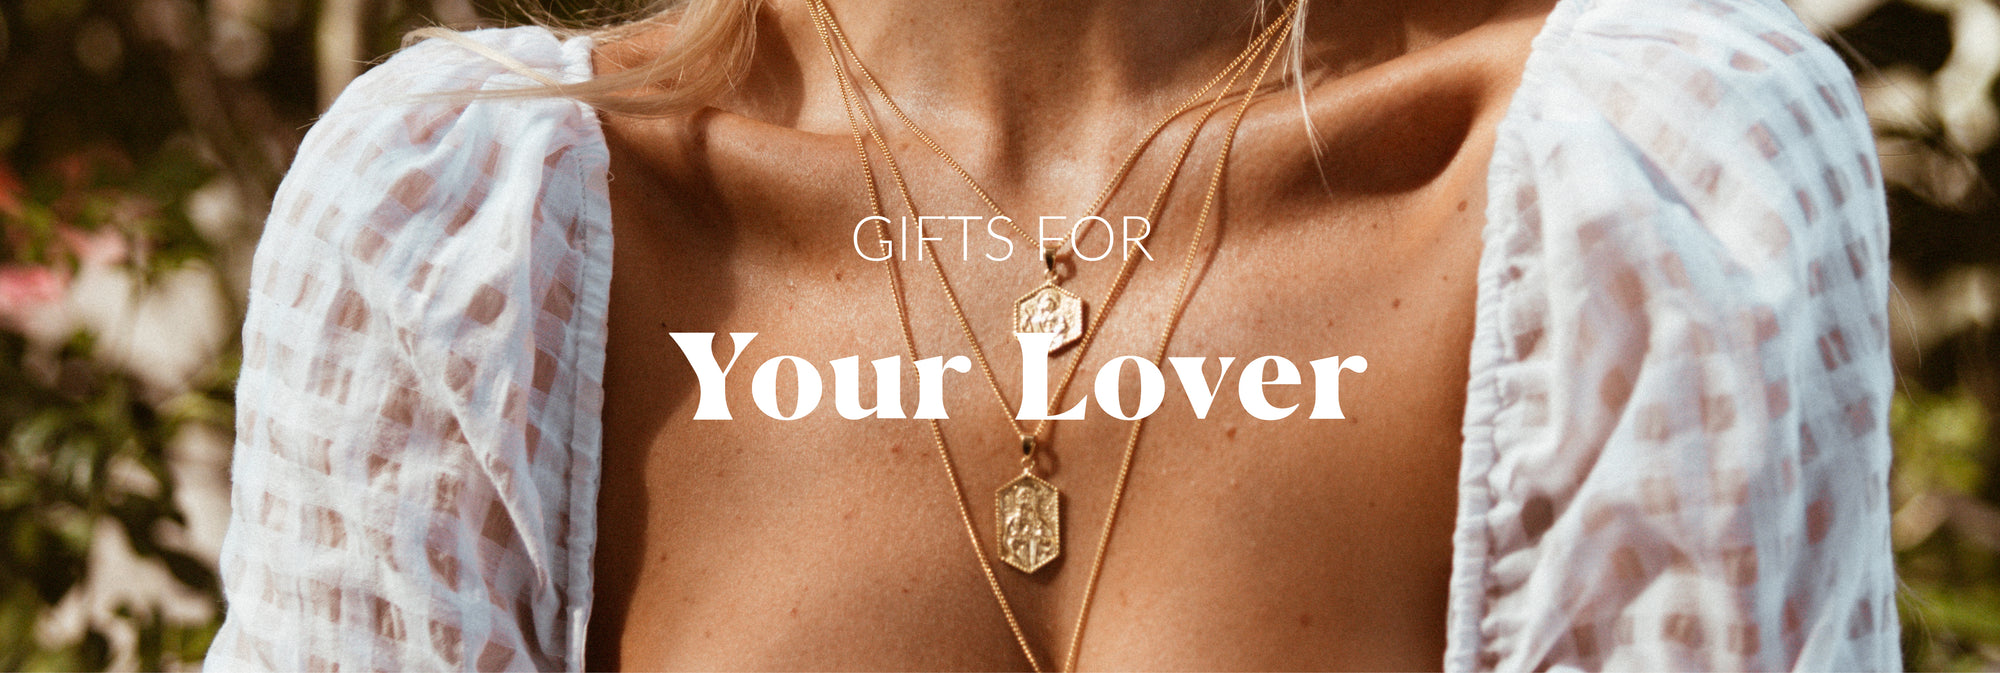 Gifts for your Lover